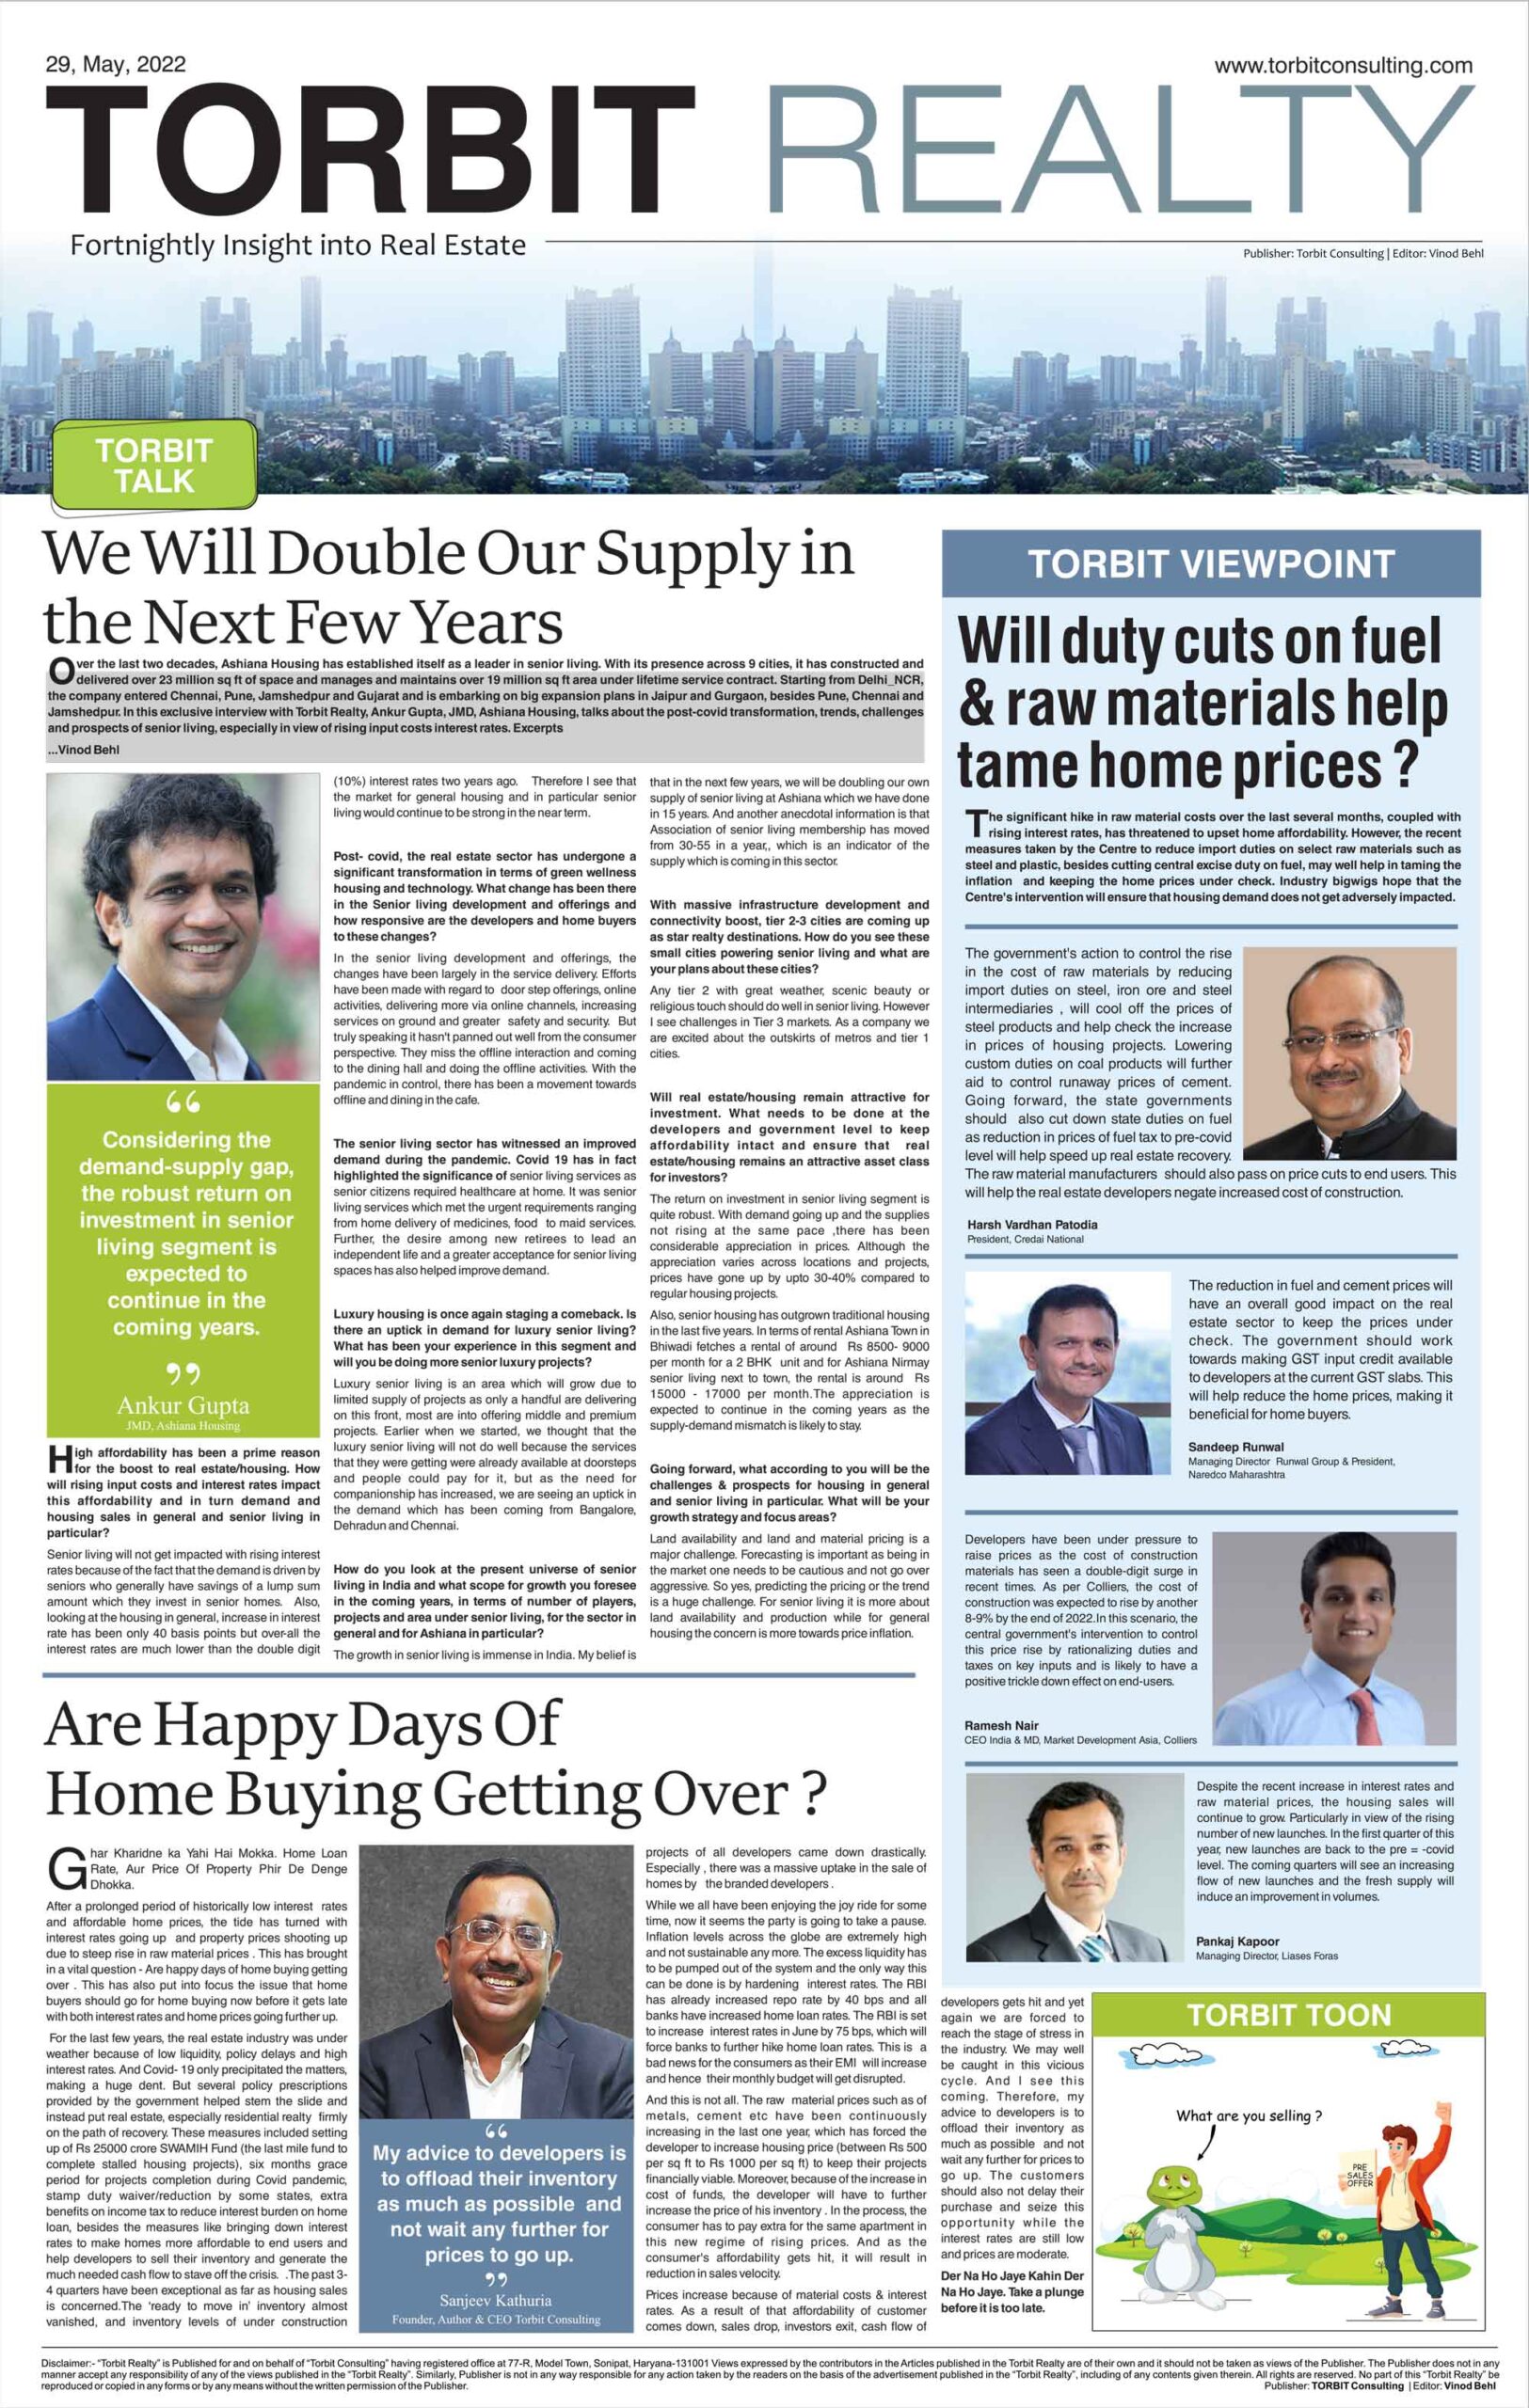 Torbit Realty 29th May 2022 1st Page